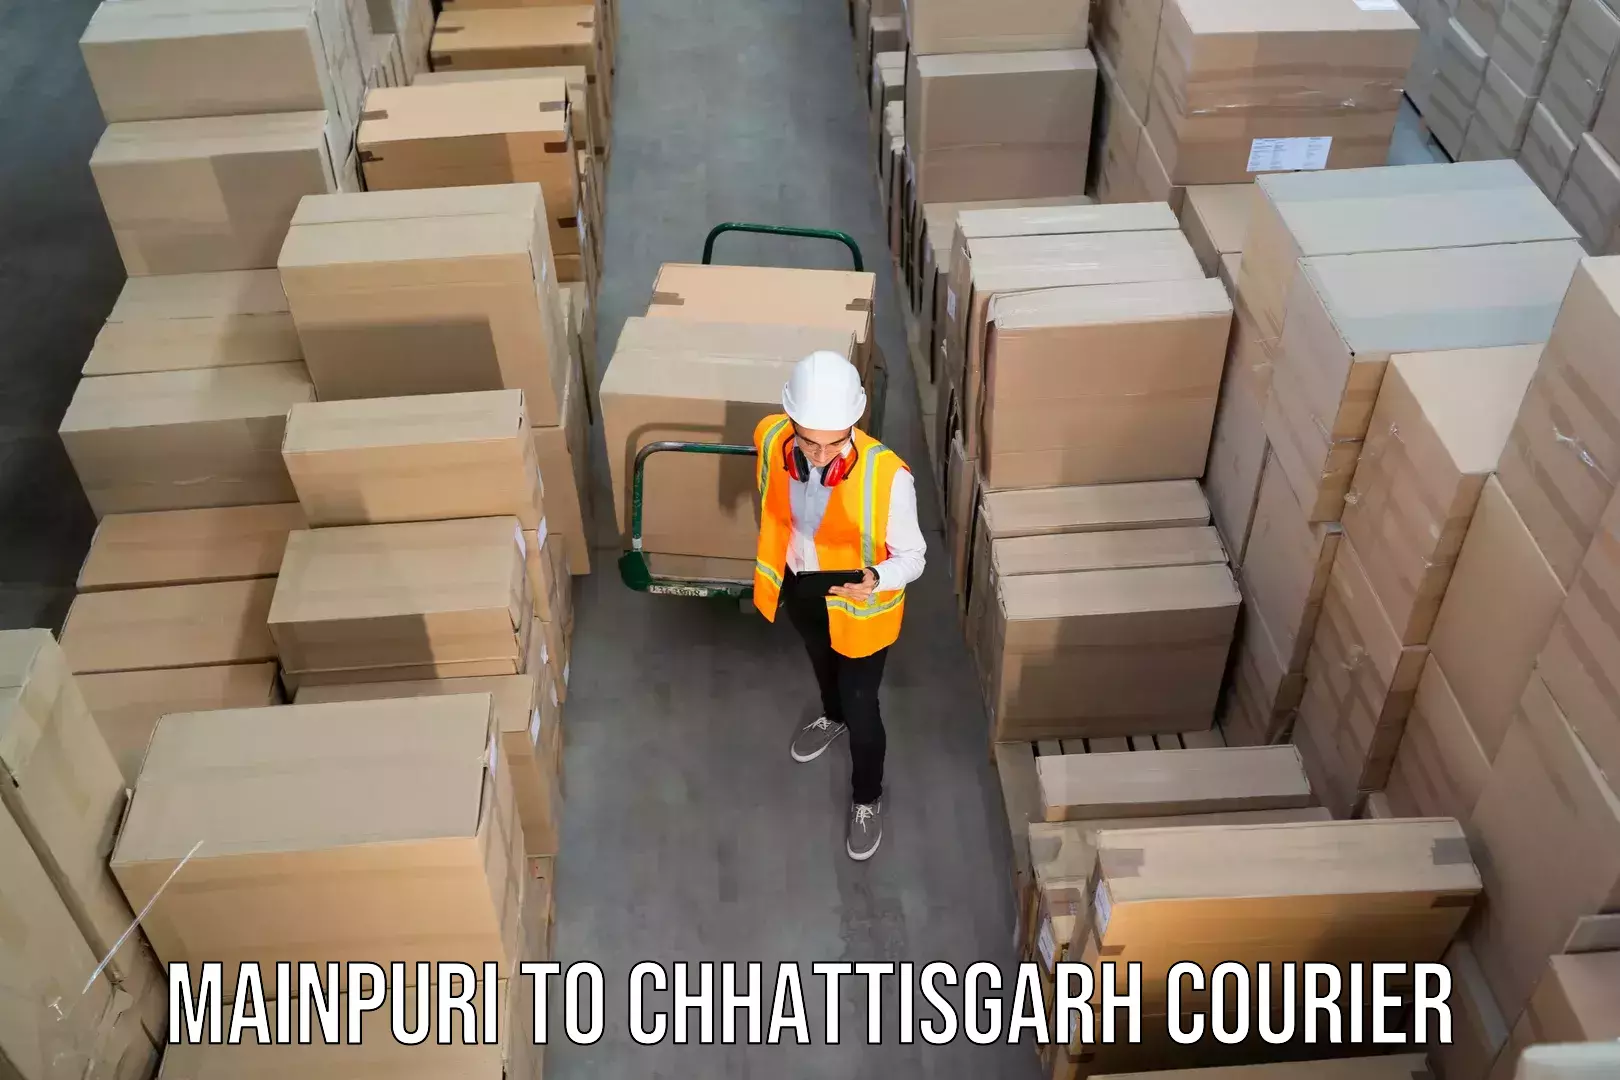 Round-the-clock parcel delivery Mainpuri to Bargidih